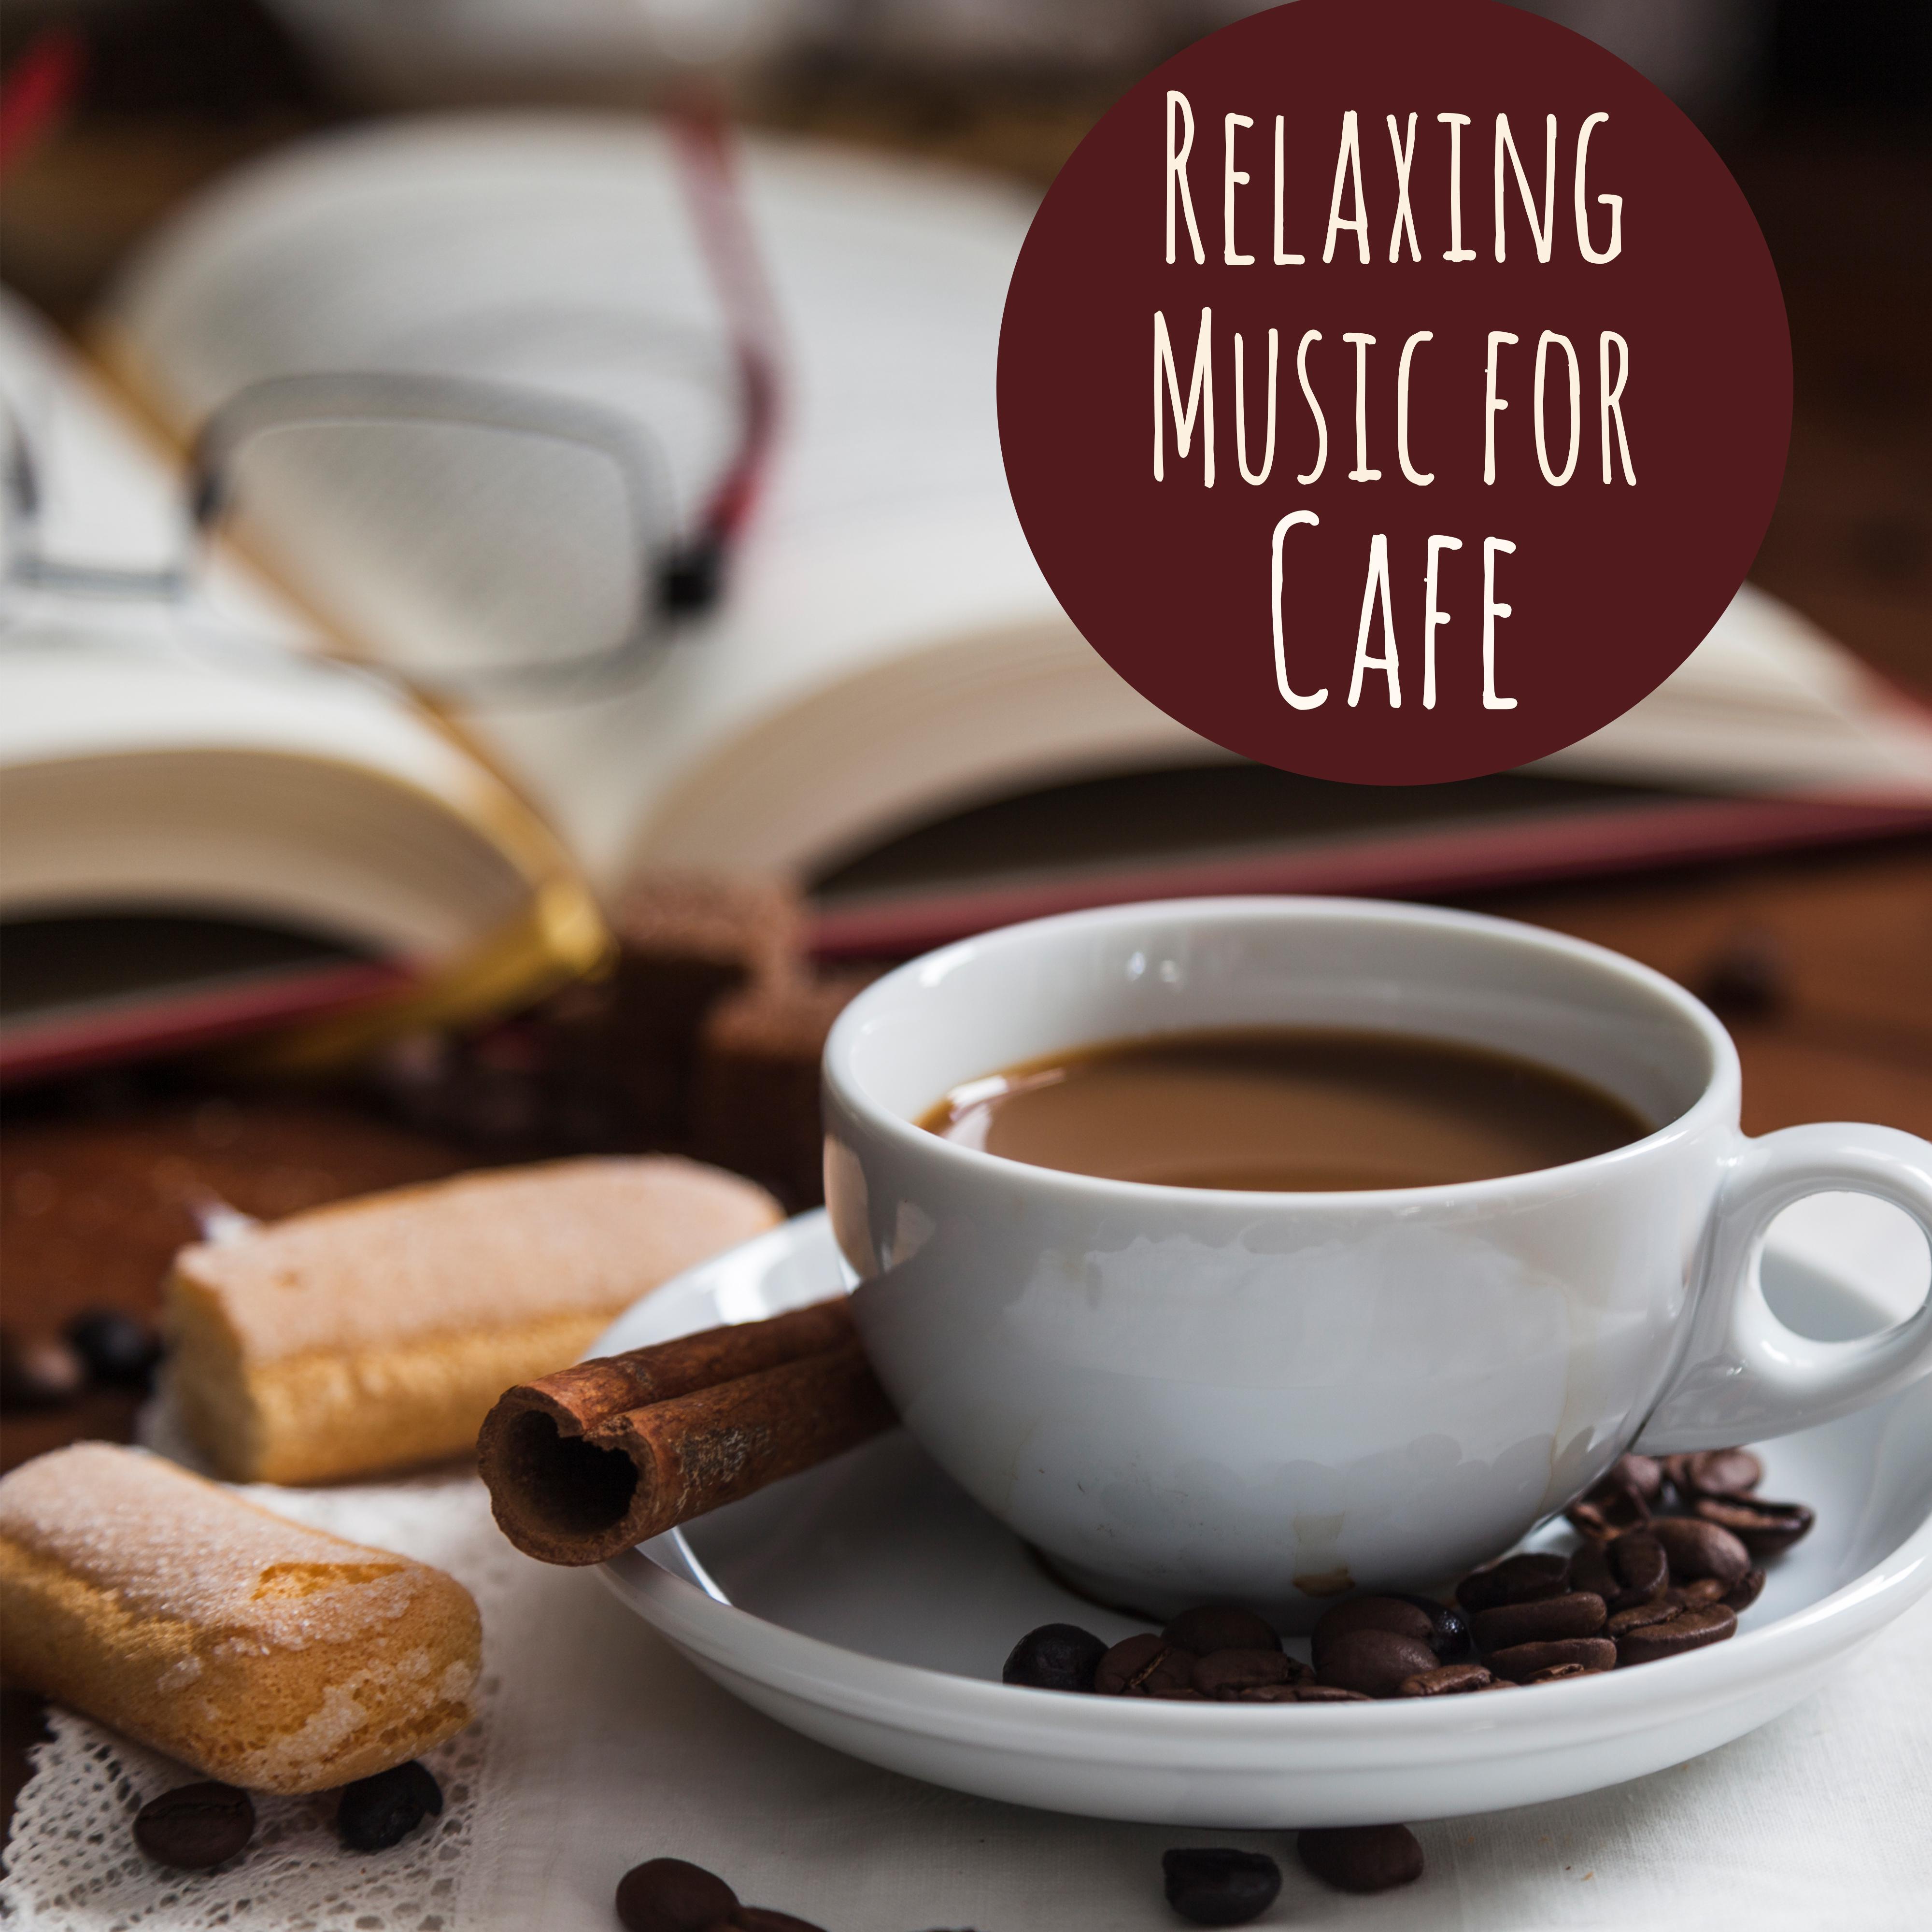 Relaxing Music for Cafe